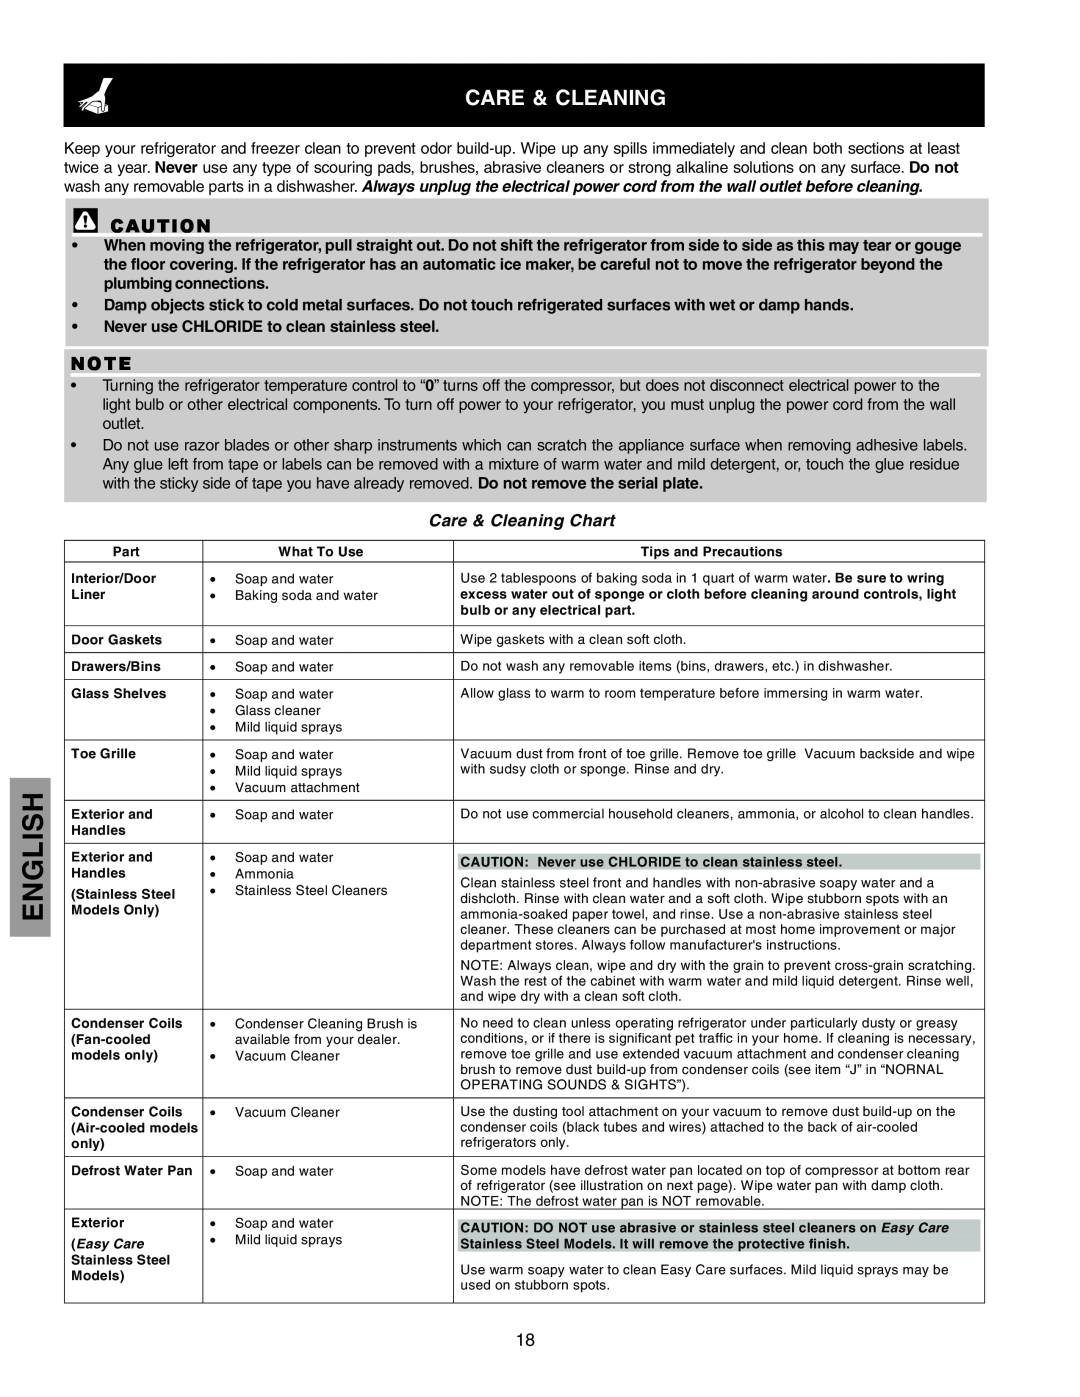 Kenmore 241815202 manual English, Care & Cleaning Chart 